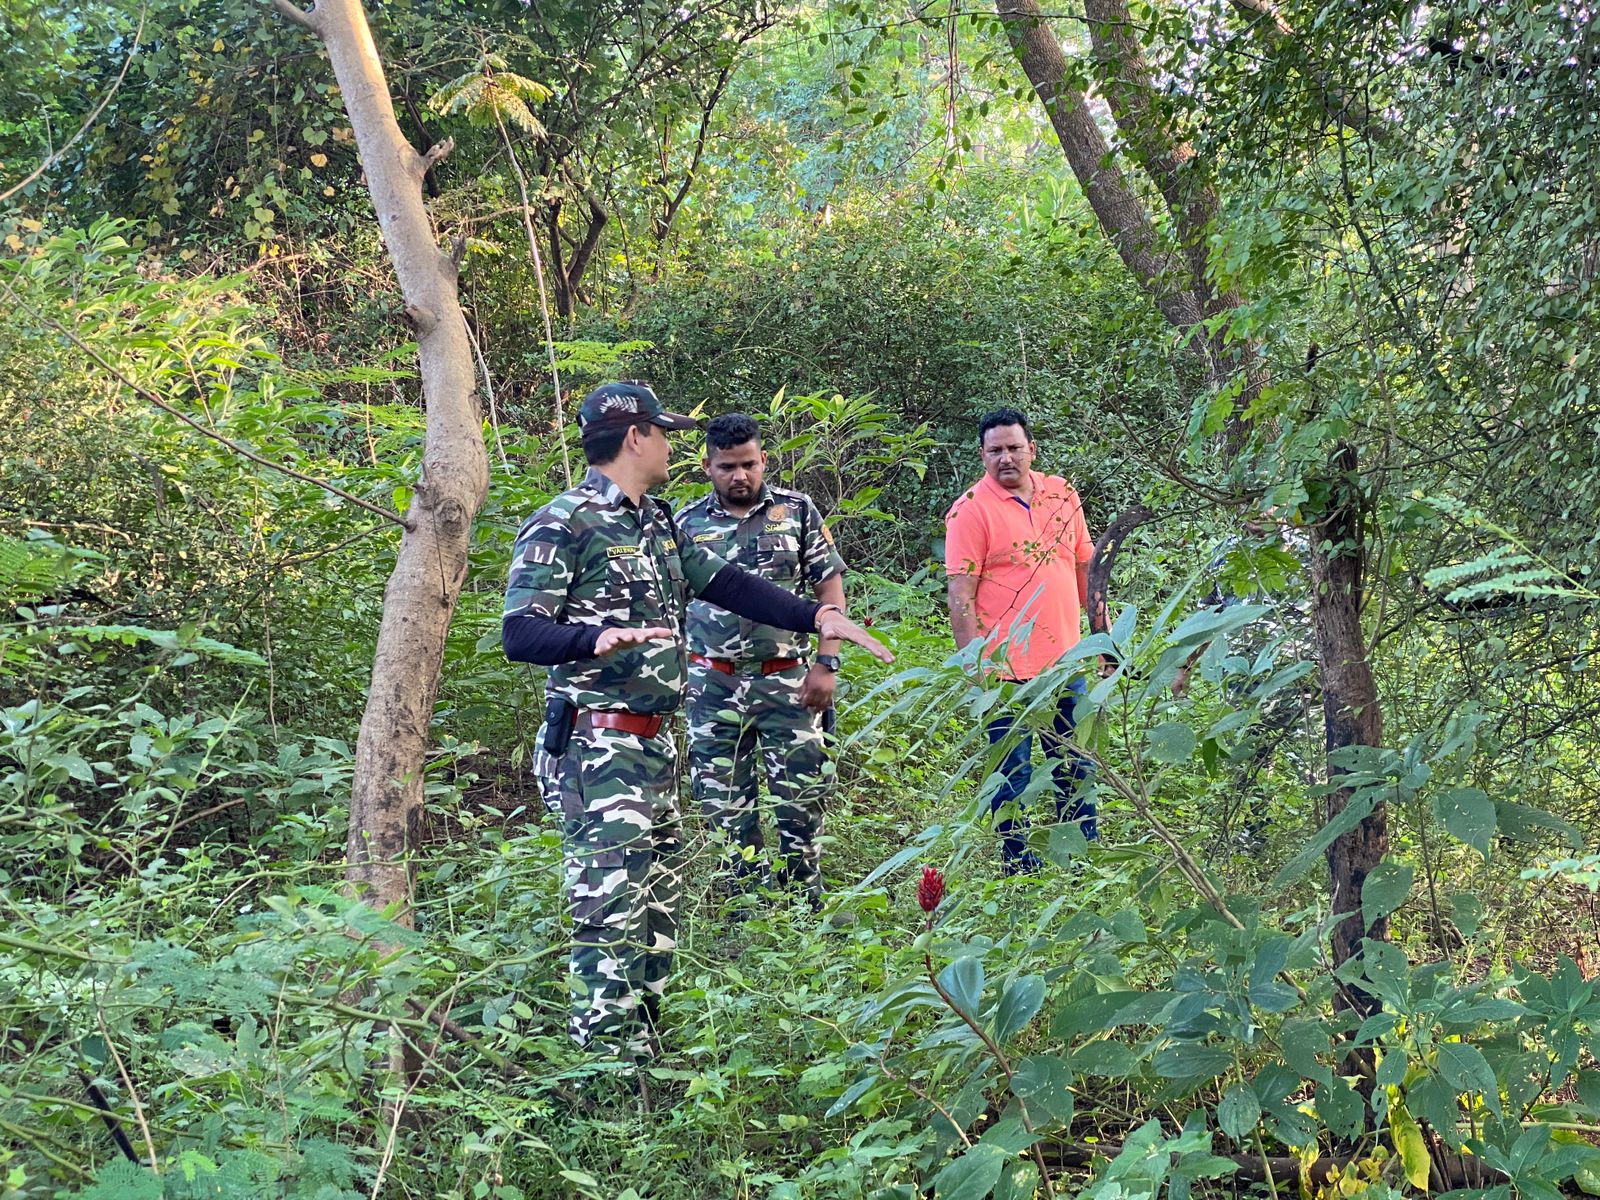 Volunteers from the Aarey Camera Trapping Team and NGO WWA are assisting the forest department to trap C-56. On Monday night, one trap cage was set up in the green zone, while two more were installed on Tuesday night